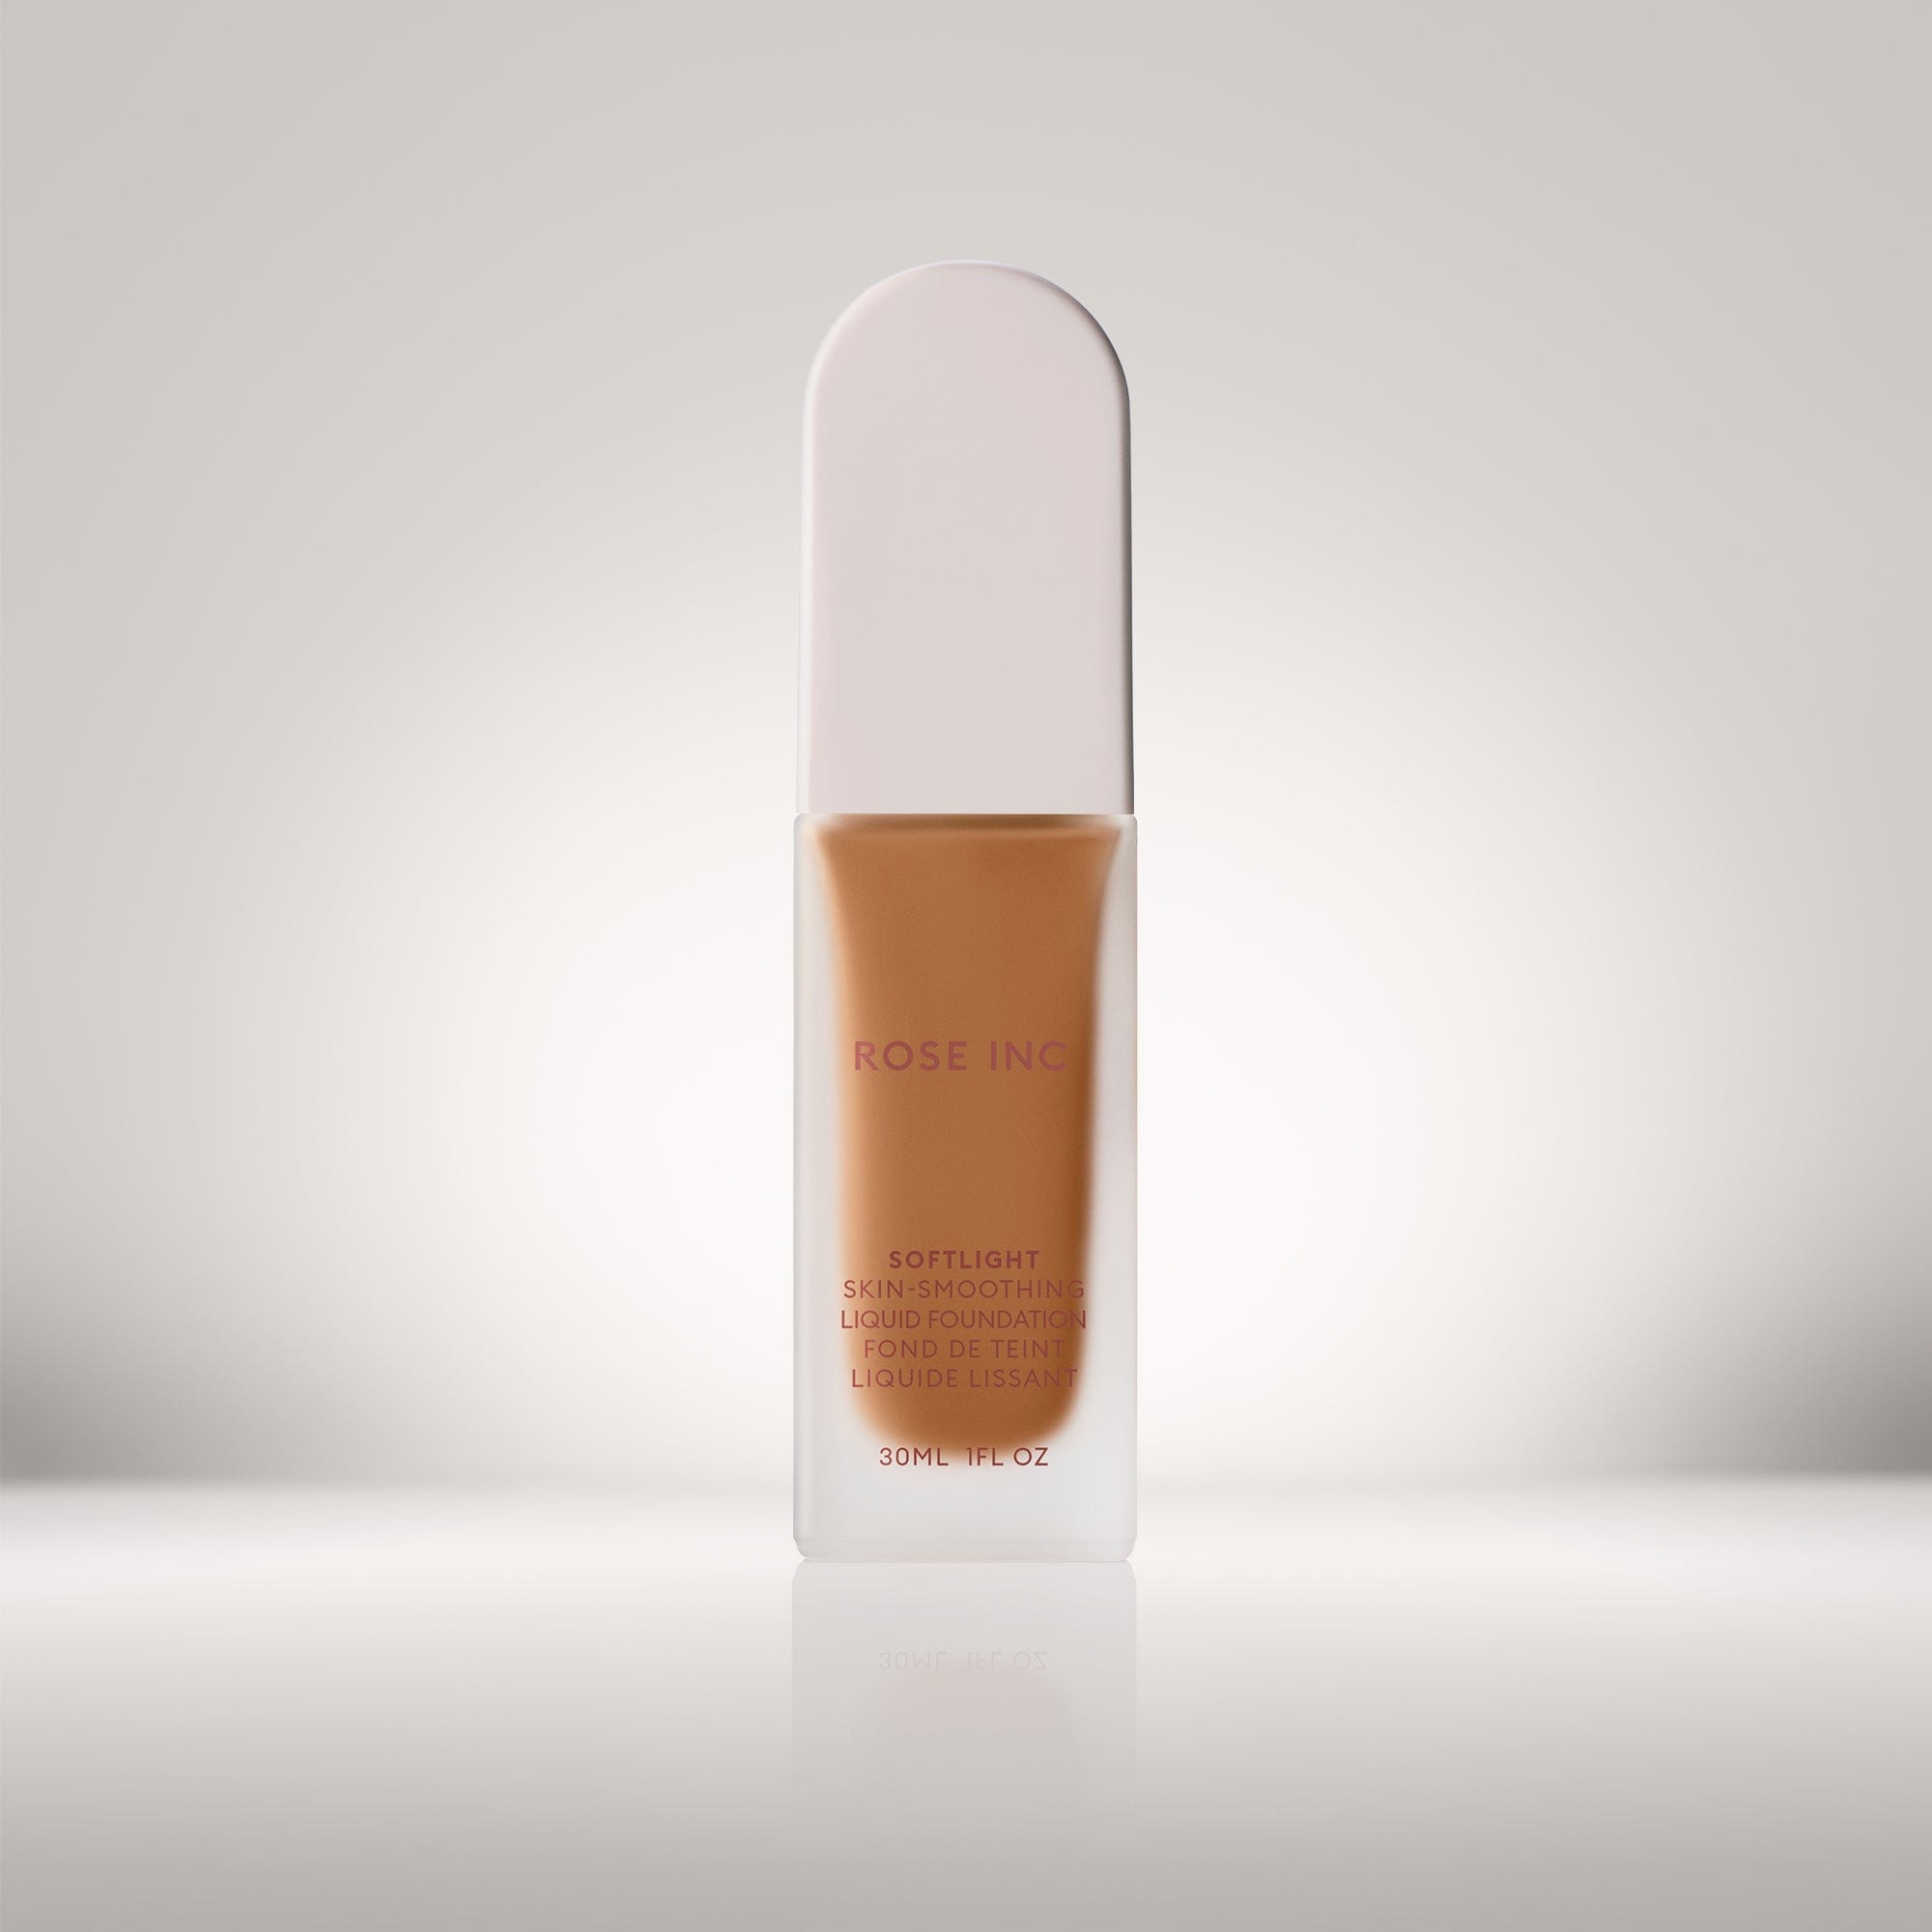 Soldier image of shade 24W in Softlight Smoothing Foundation